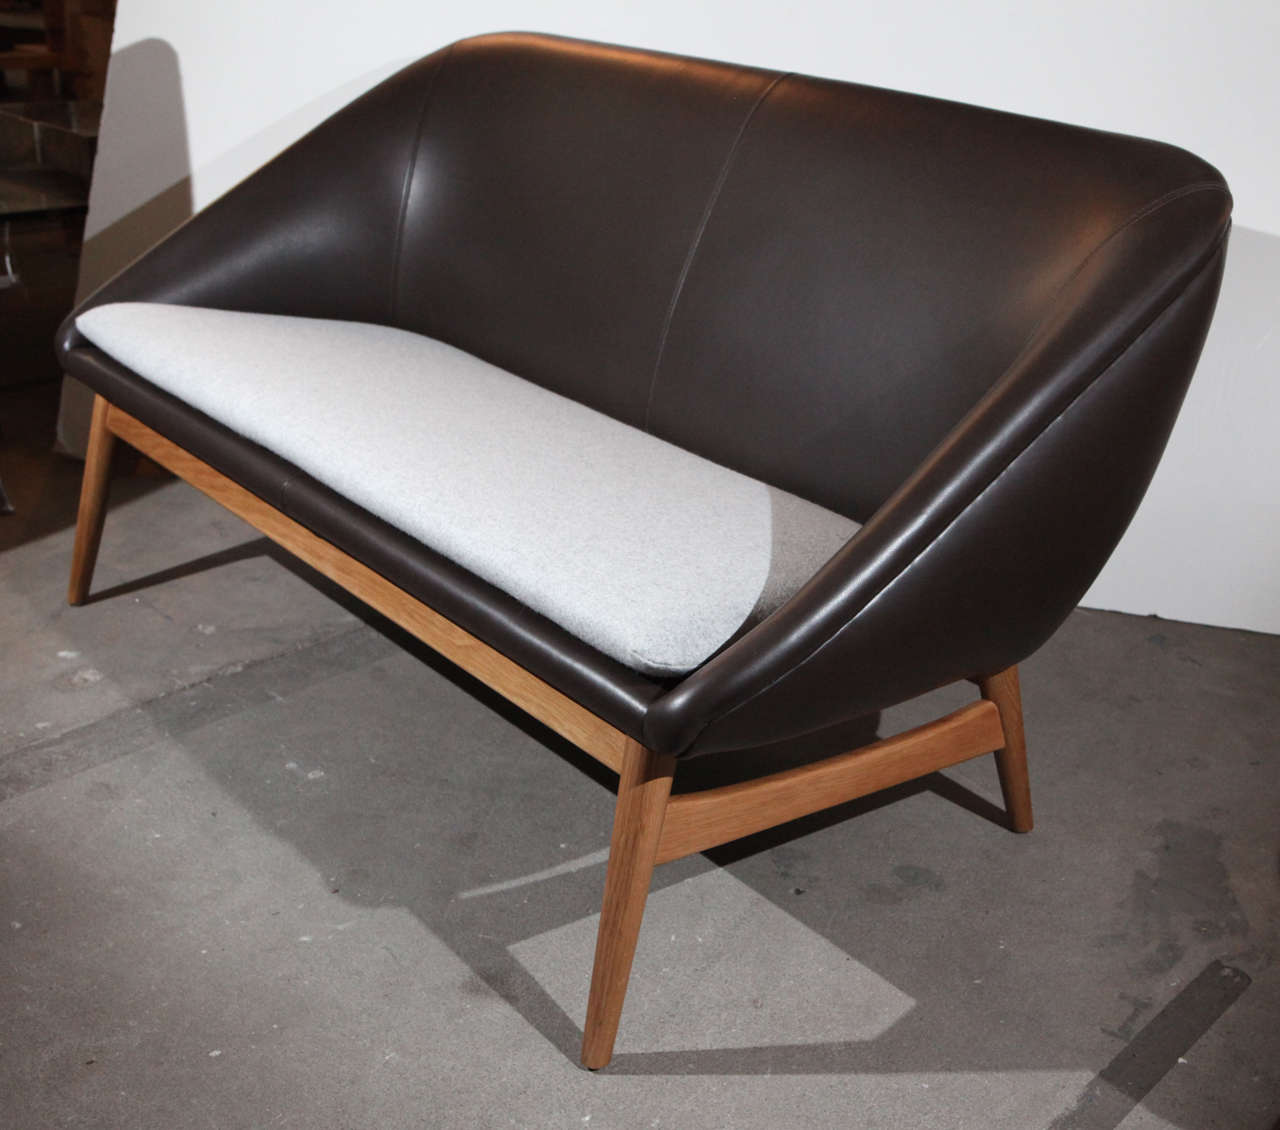 Sushi 2-Seater designed by Arne Hovmand Olsen In white oak, fabric and leather.